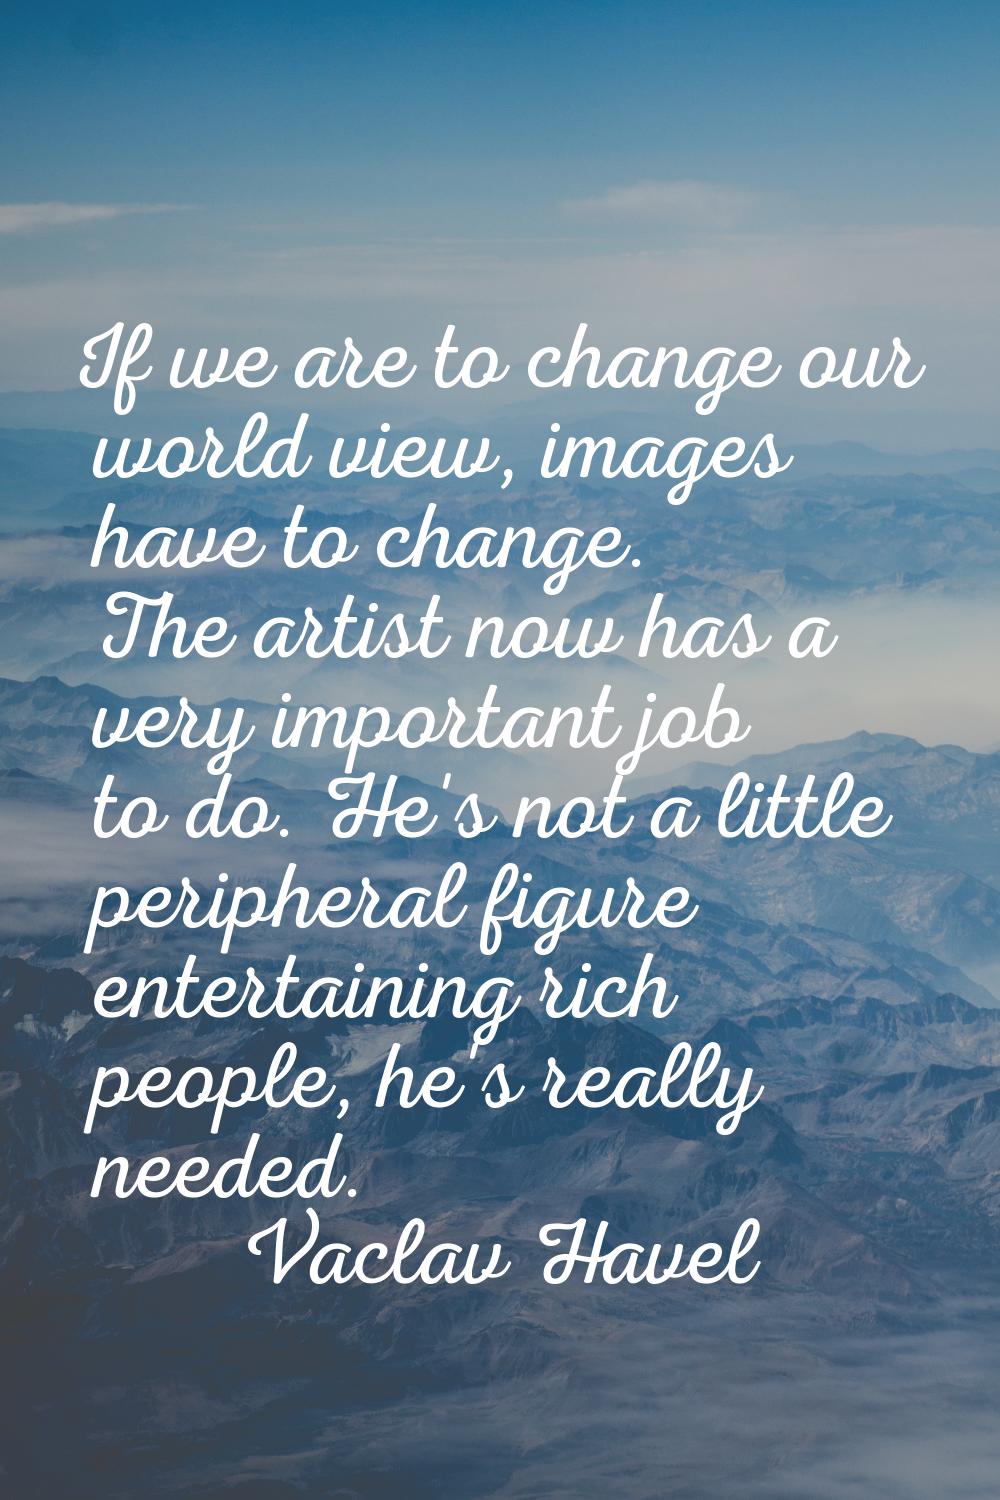 If we are to change our world view, images have to change. The artist now has a very important job 